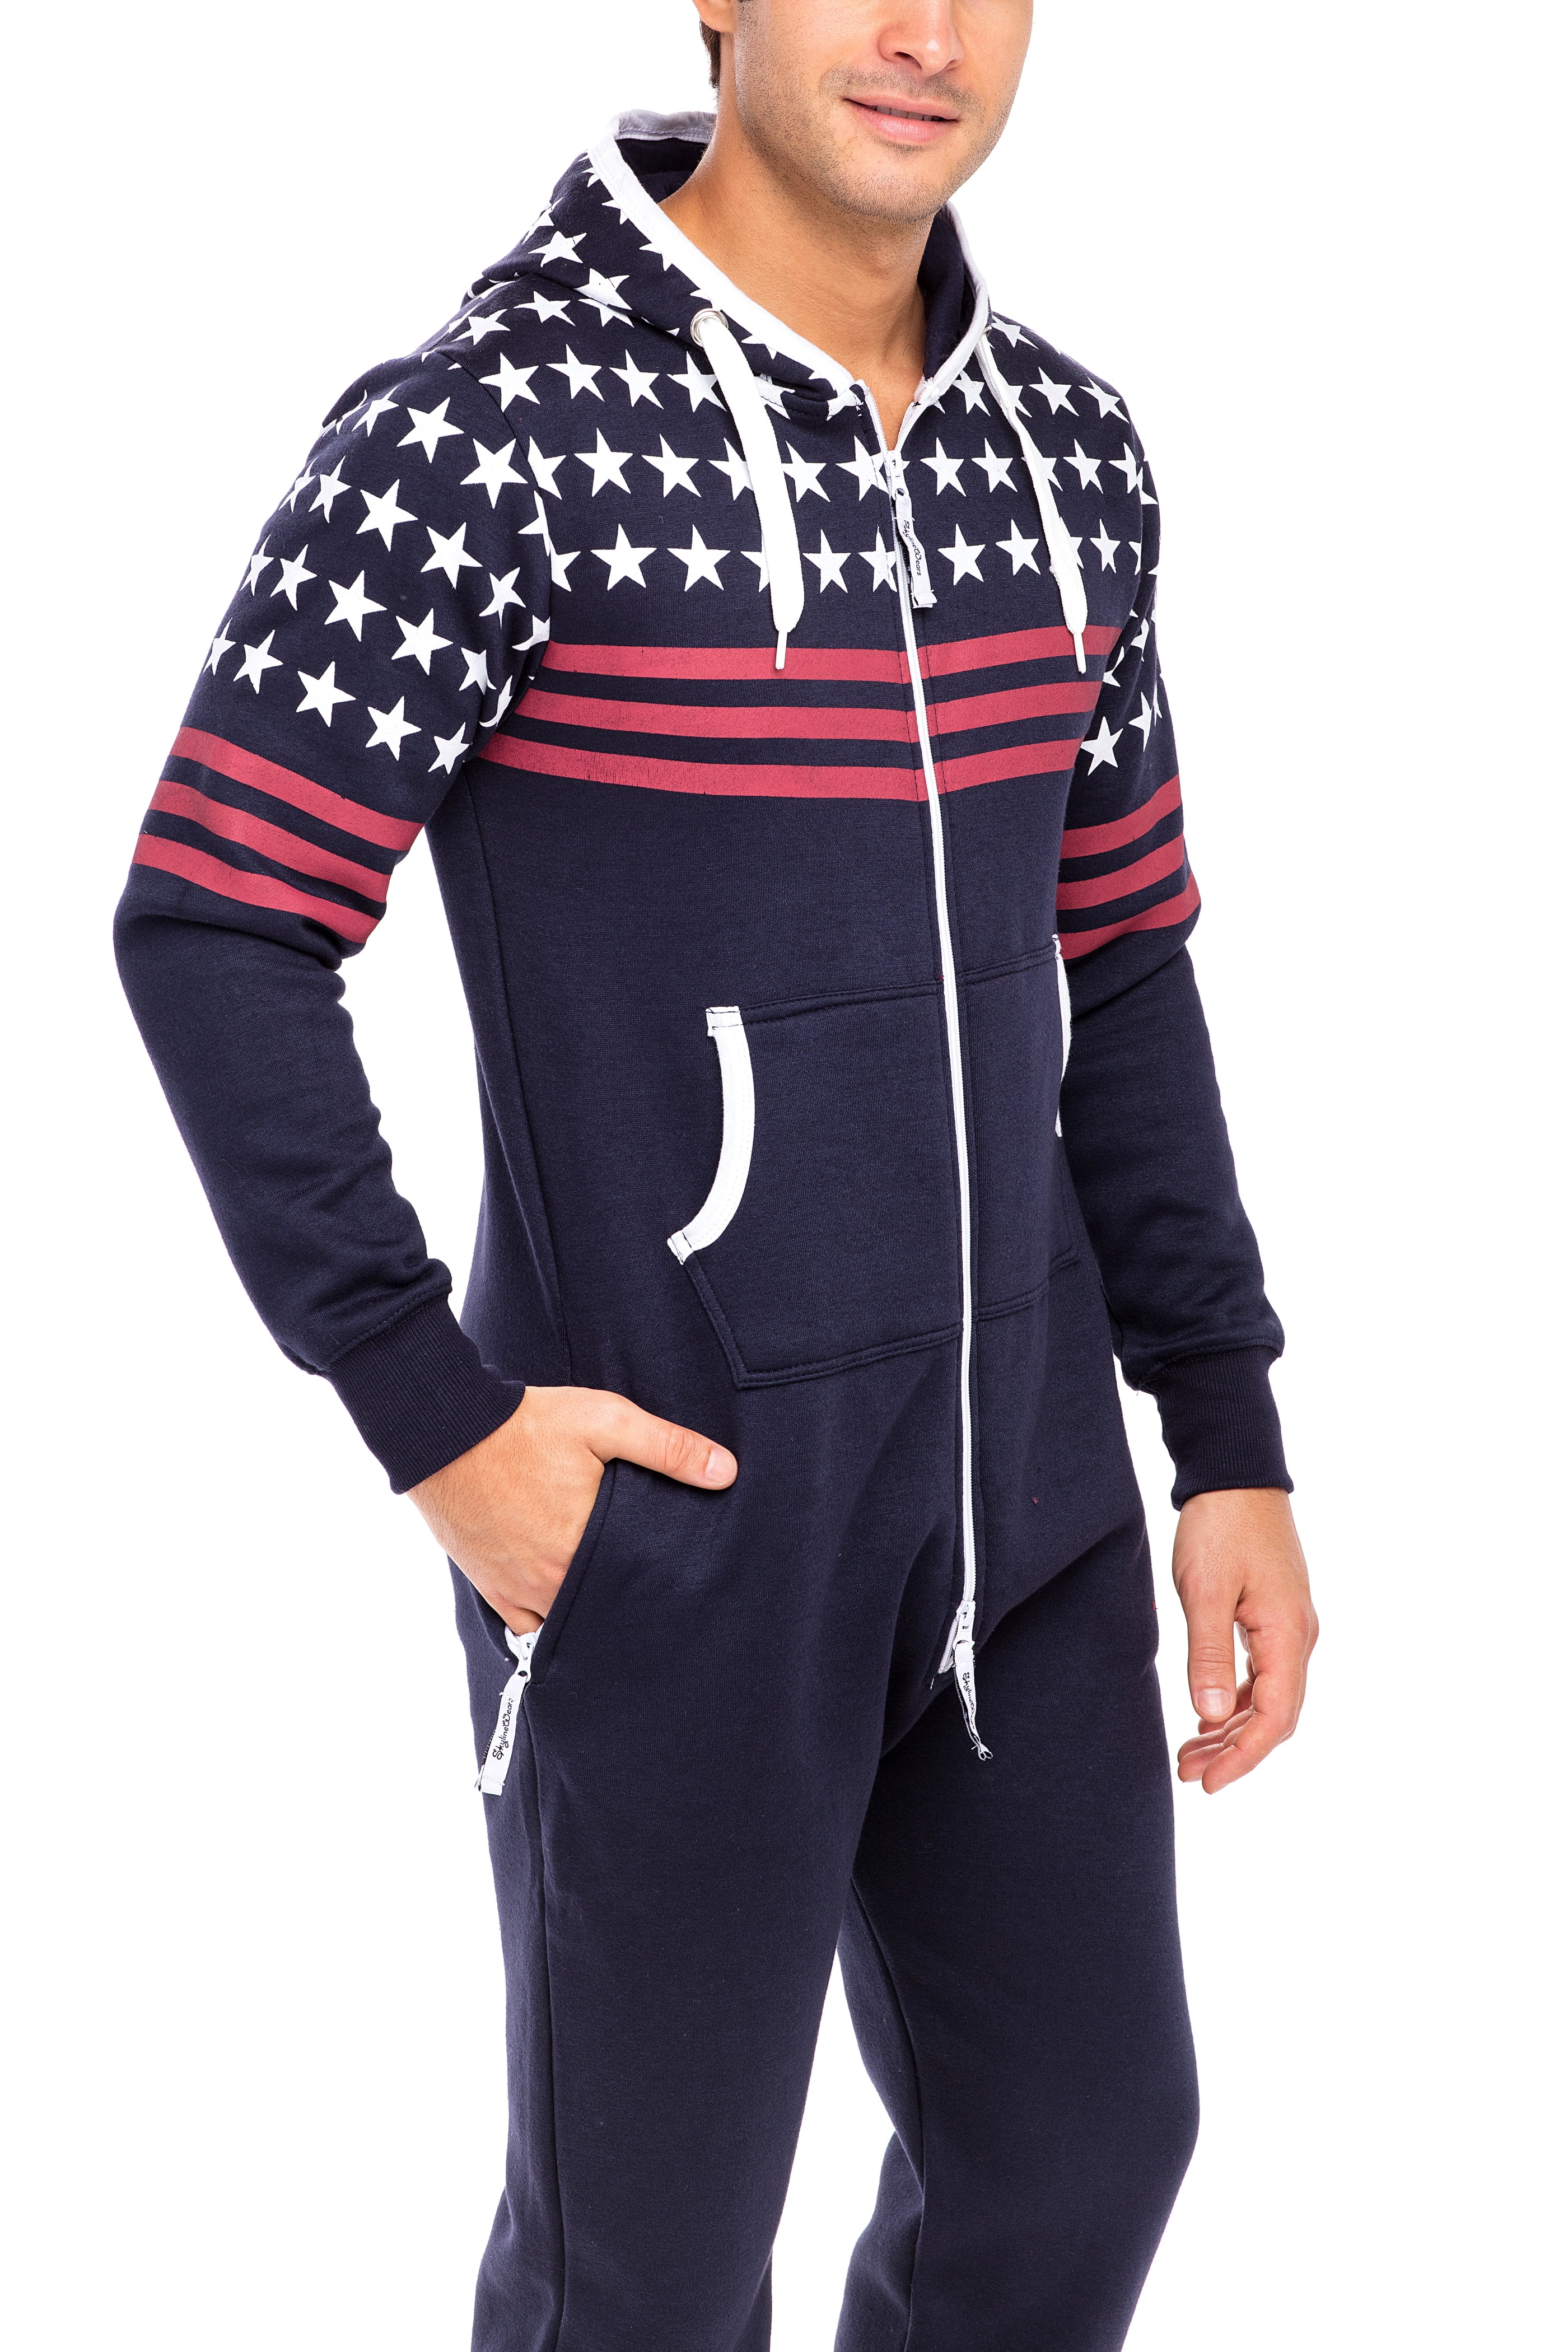 Mens Adult 1onesie Pajamas All in 1 Hooded Non Footed Playsuit OnePiece  Jumpsuit